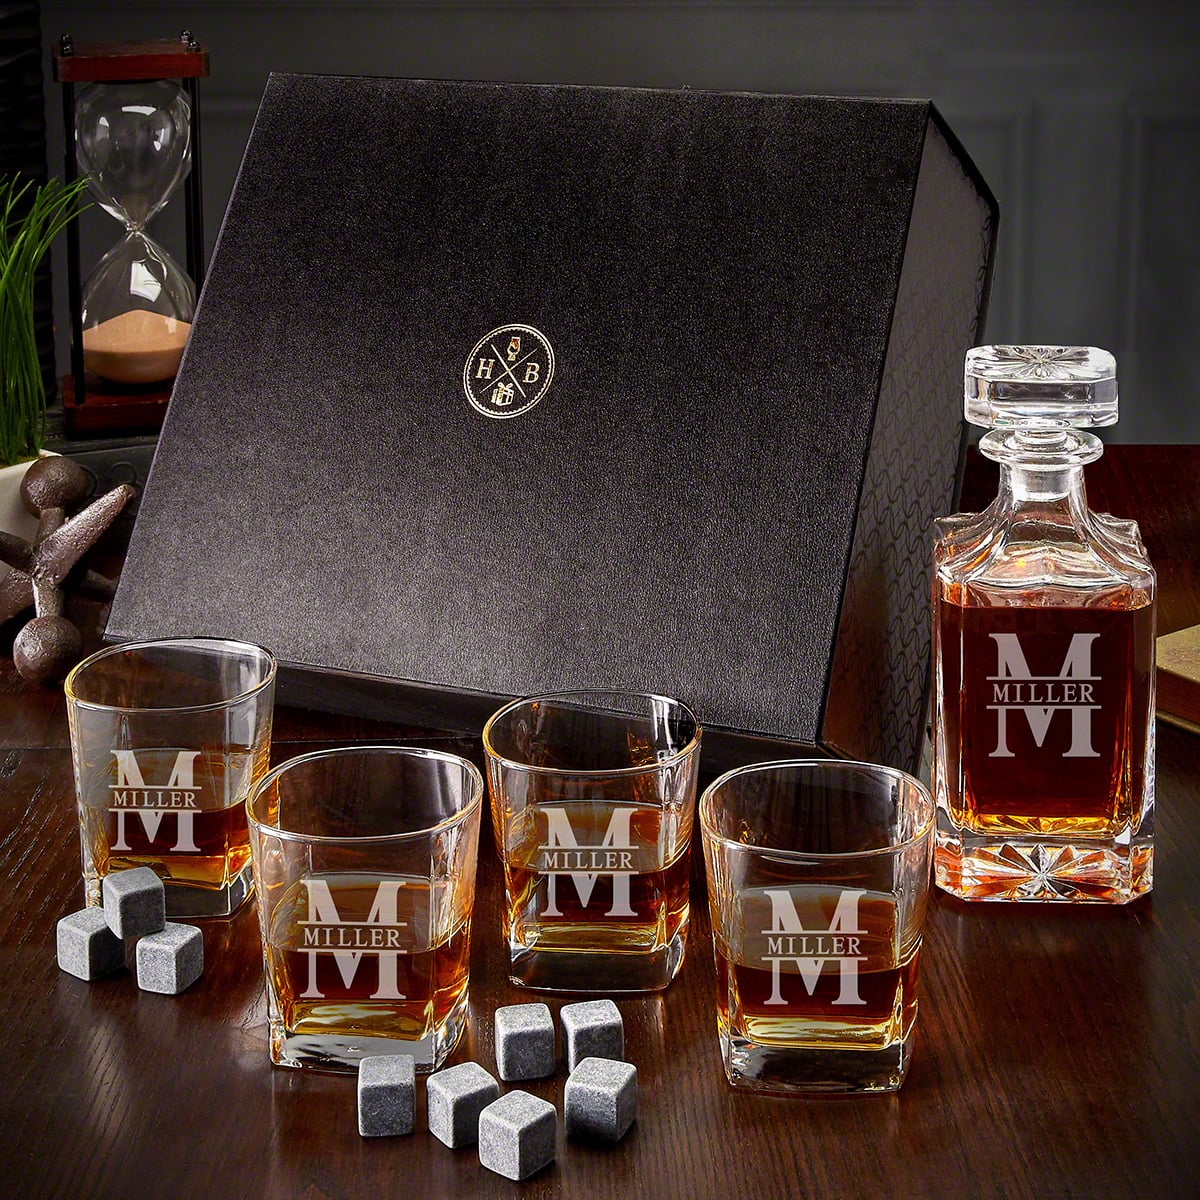 Engraved Whisky Decanter Set with Luxury Box - 7pc 